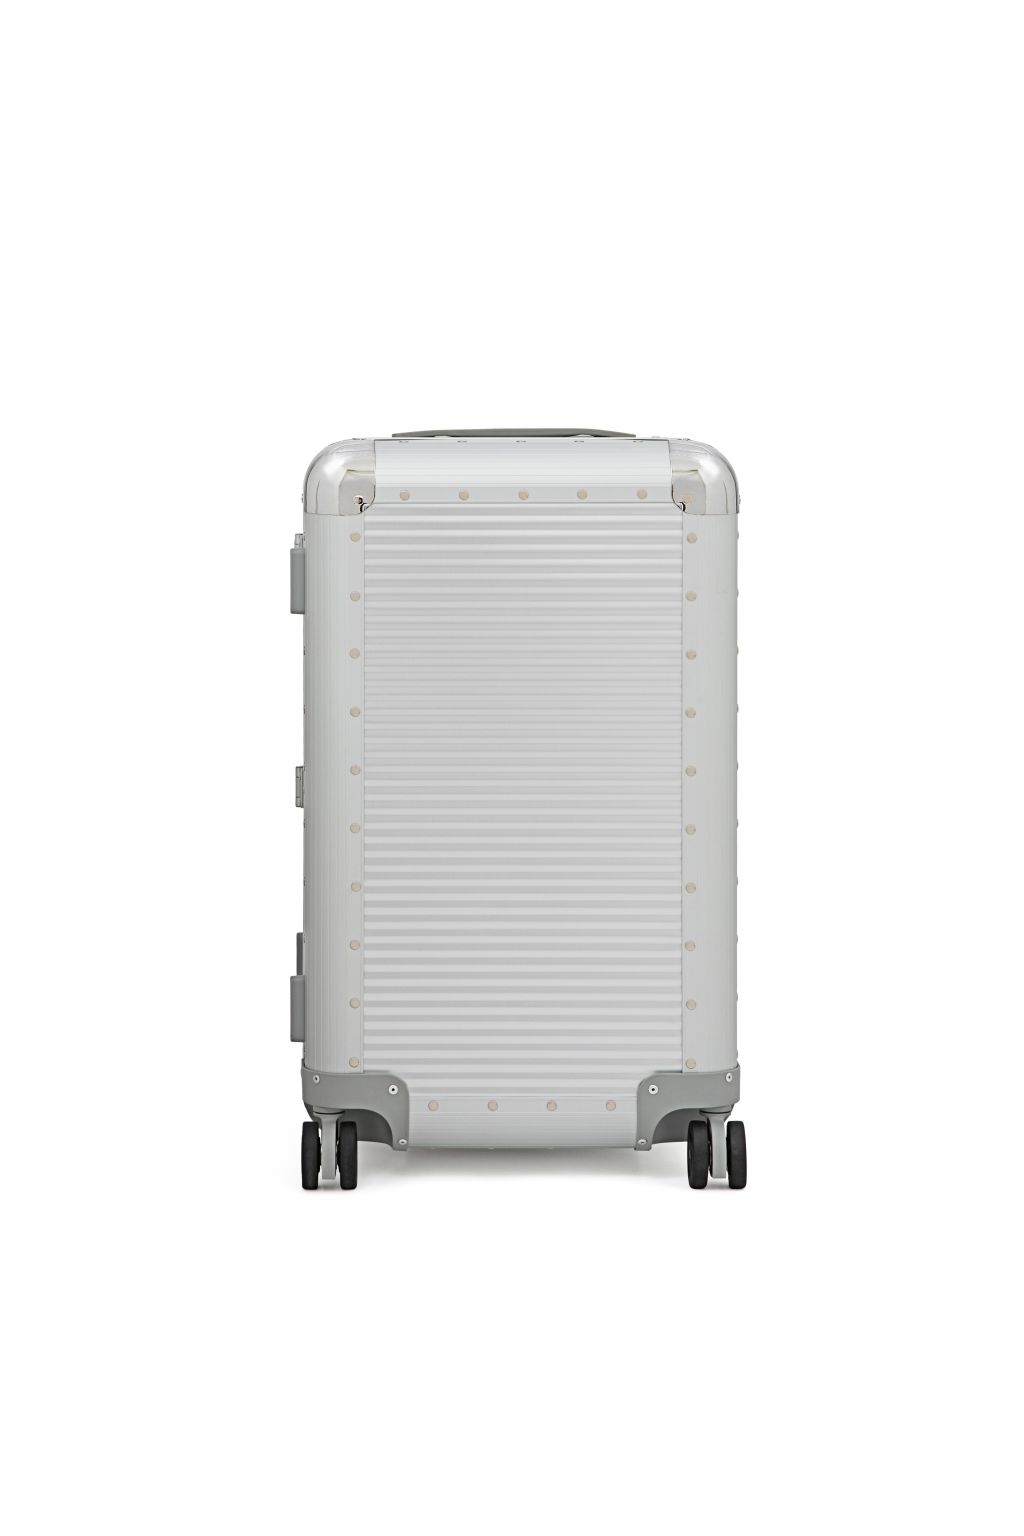 FPM Bank S Trunk on Wheels S Suitcase